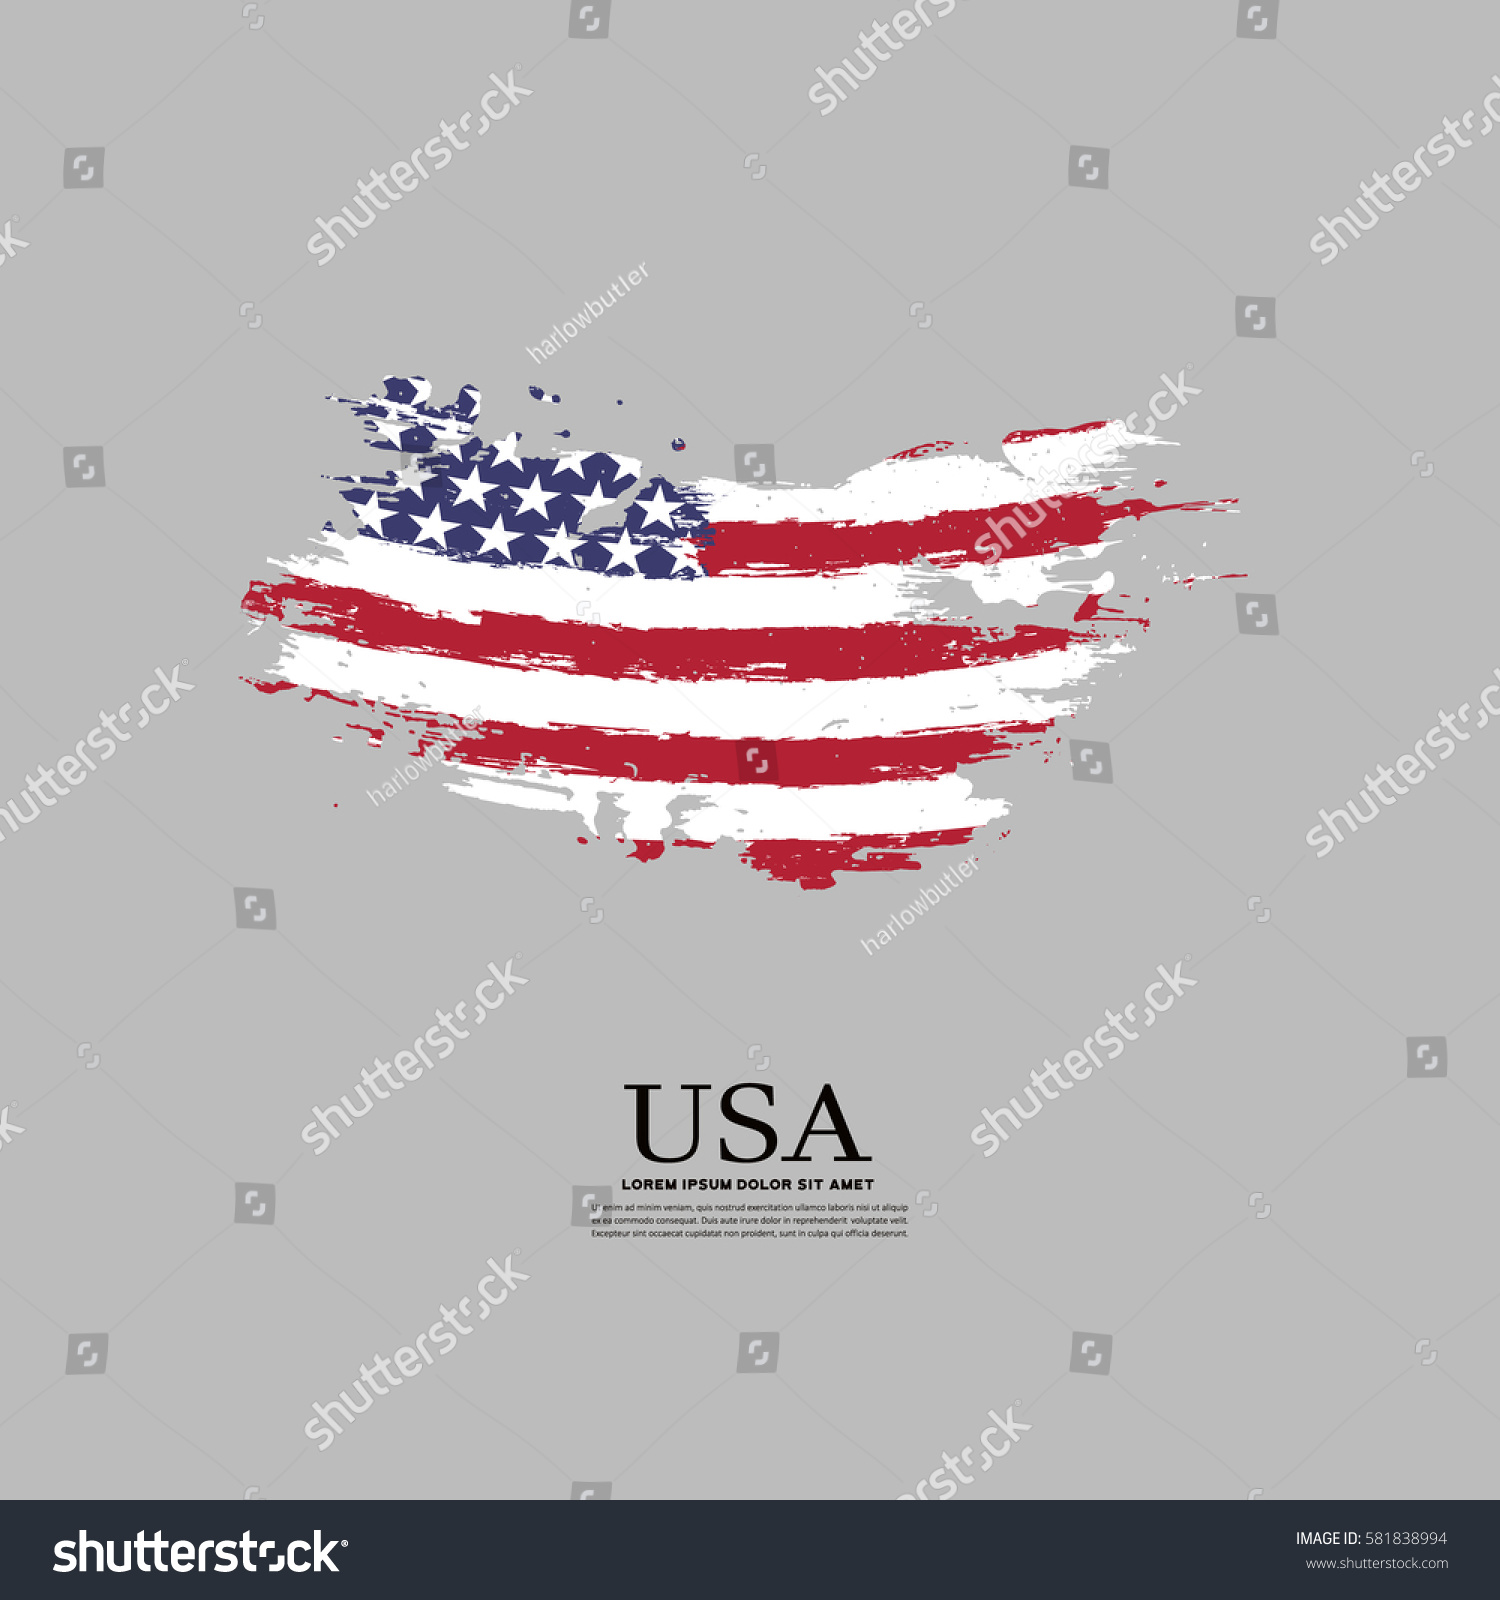 SVG of USA flag in grunge style on a gray background. svg